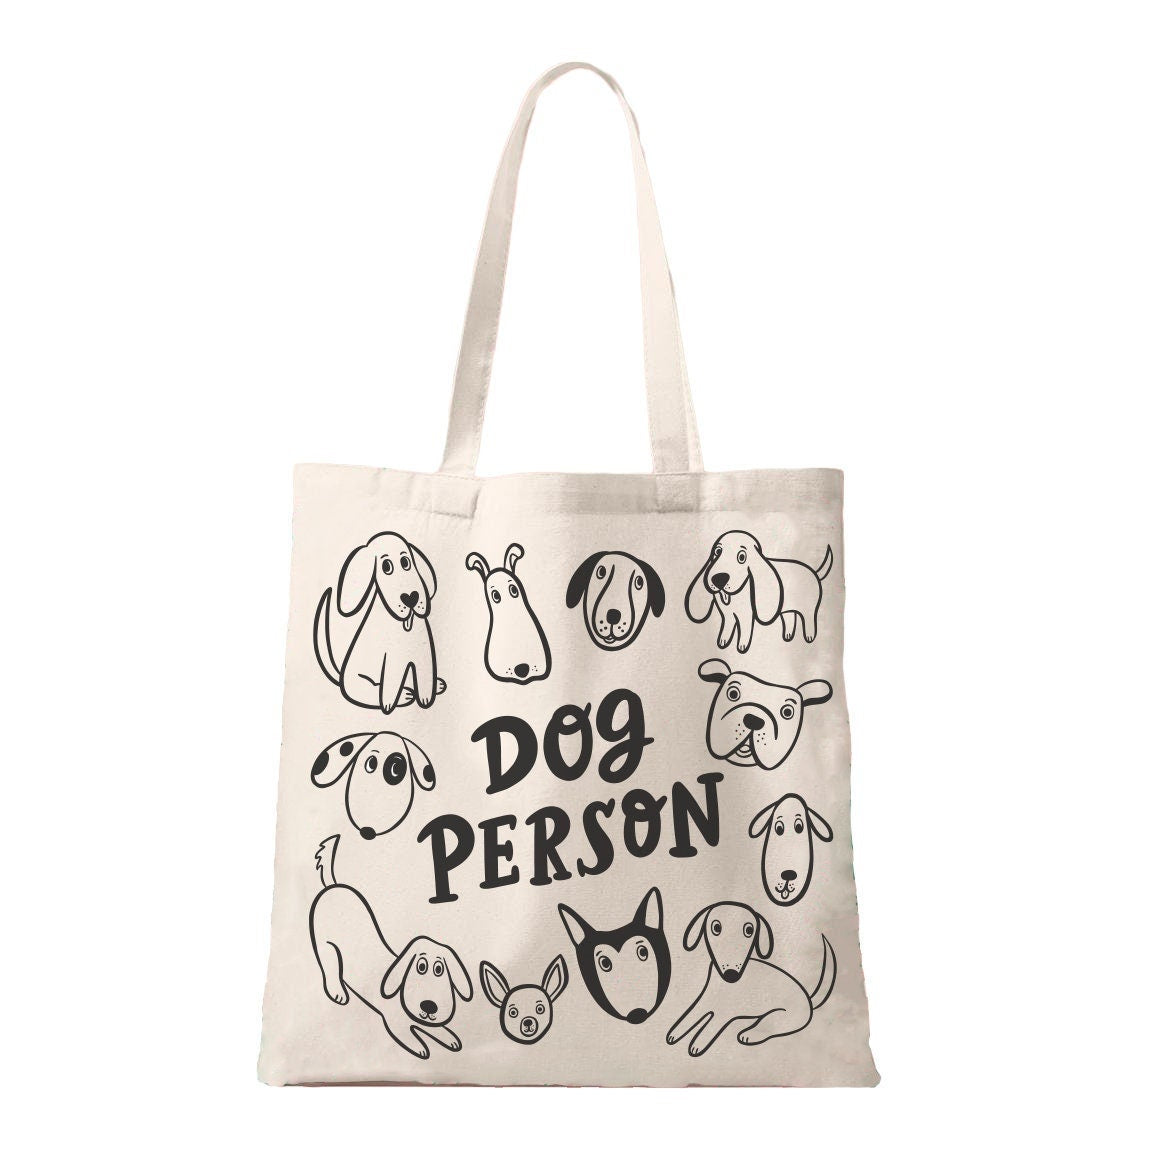 Dog Person Slightly Imperfect Tote Bag